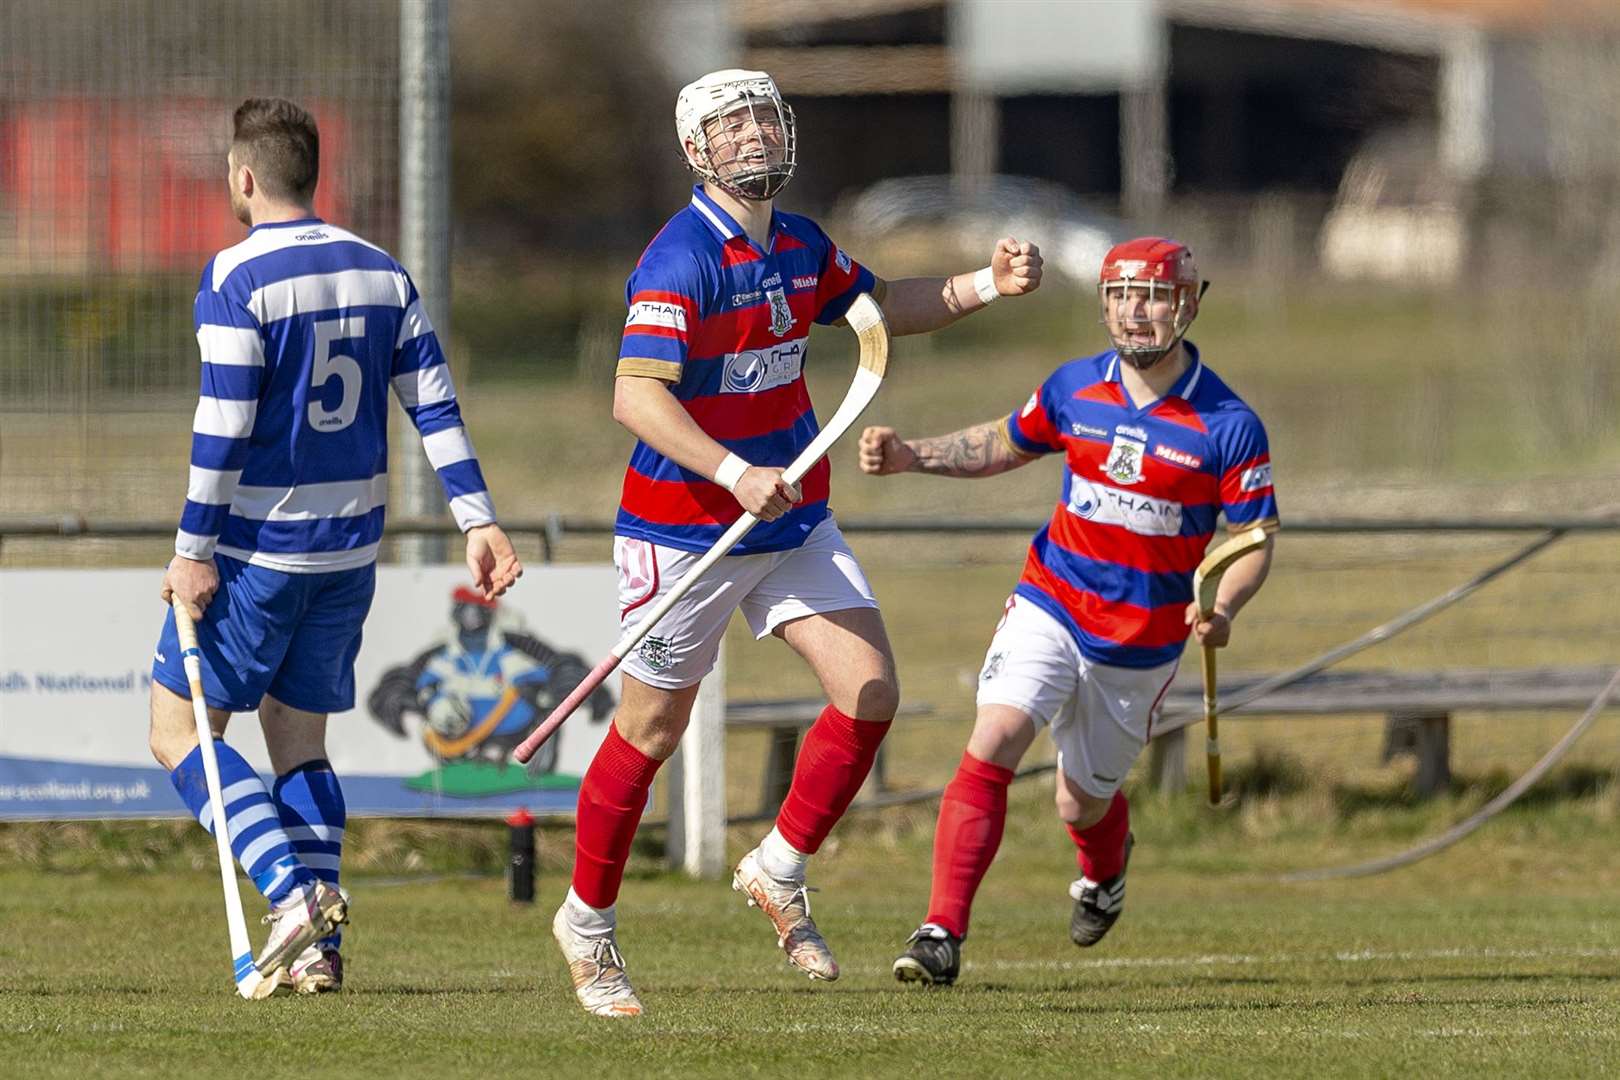 Roddy Young celebrates after scoring for Kingussie in the MOWI Premiership against Newtonmore.